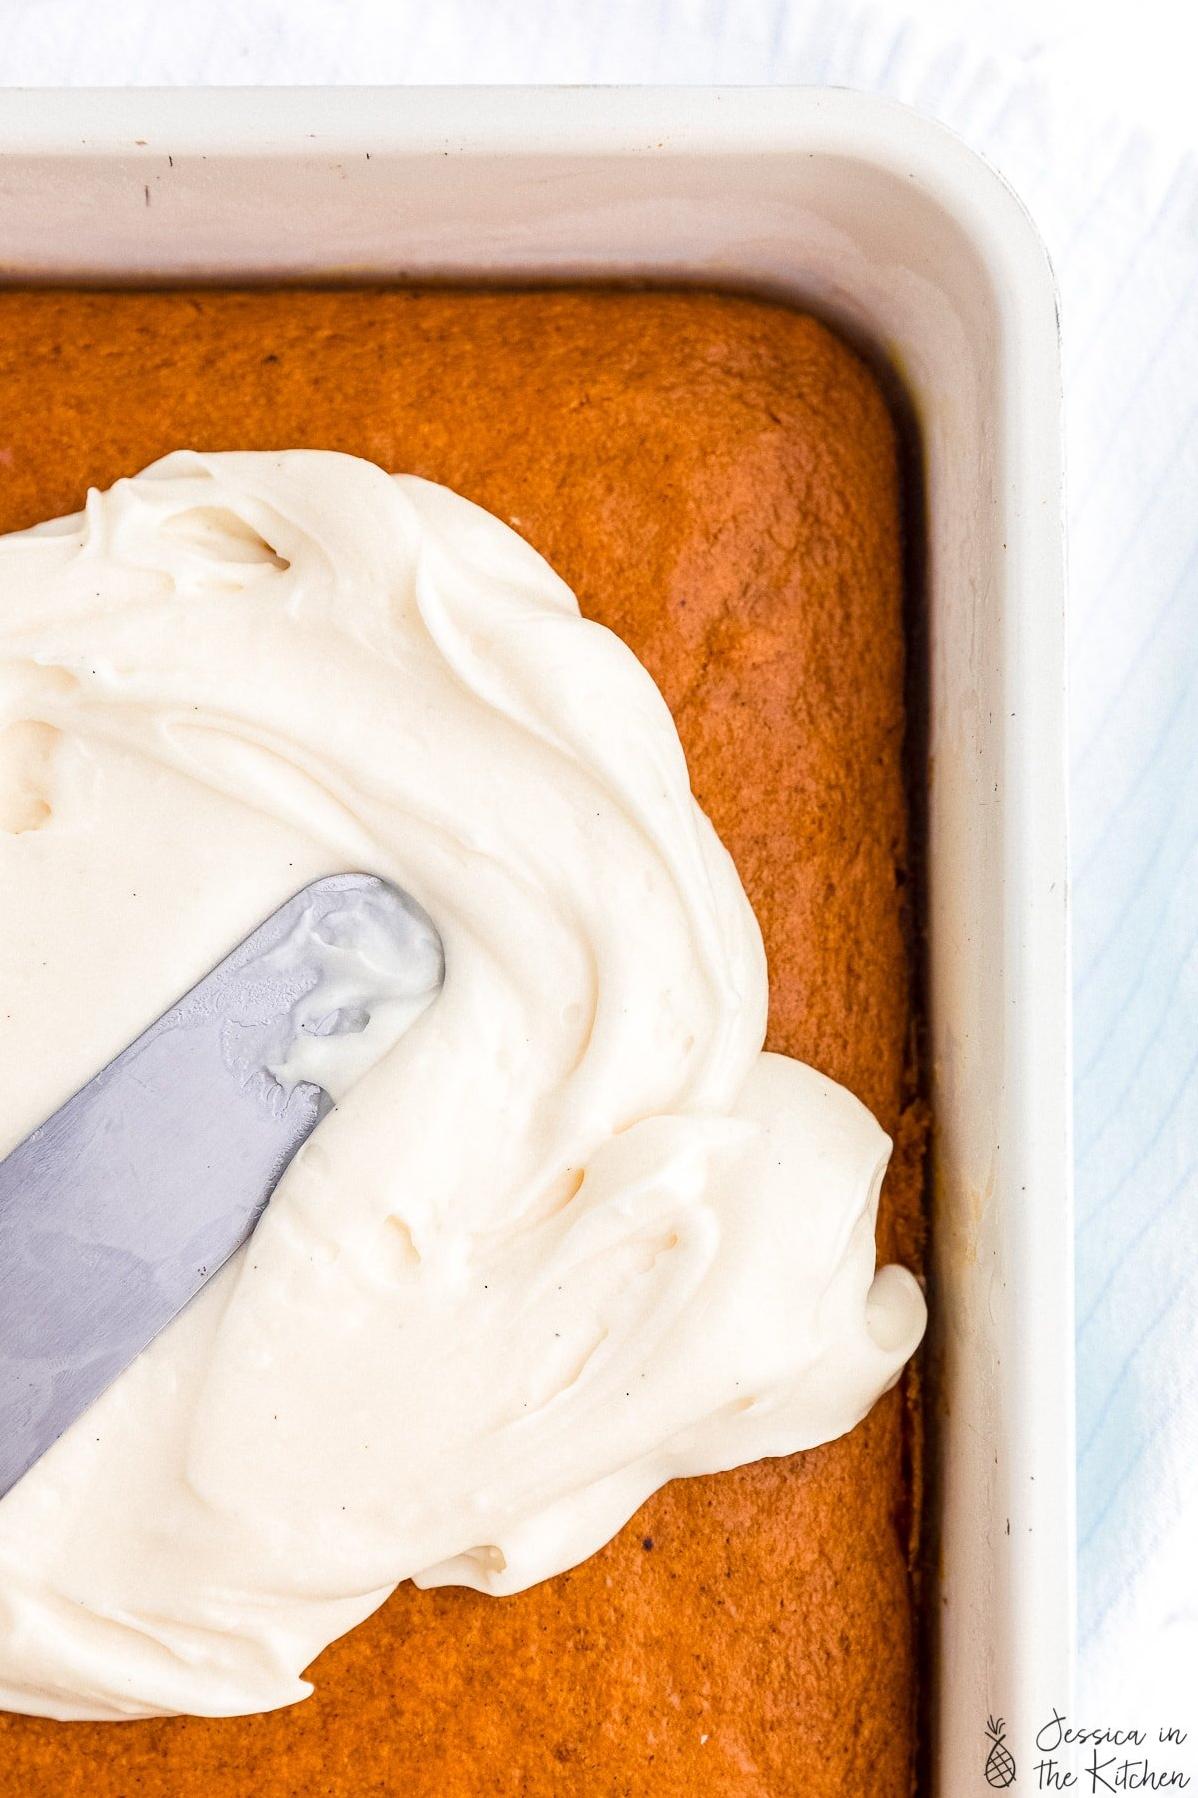  A vegan twist on a classic treat, this frosting is just as satisfying as the original